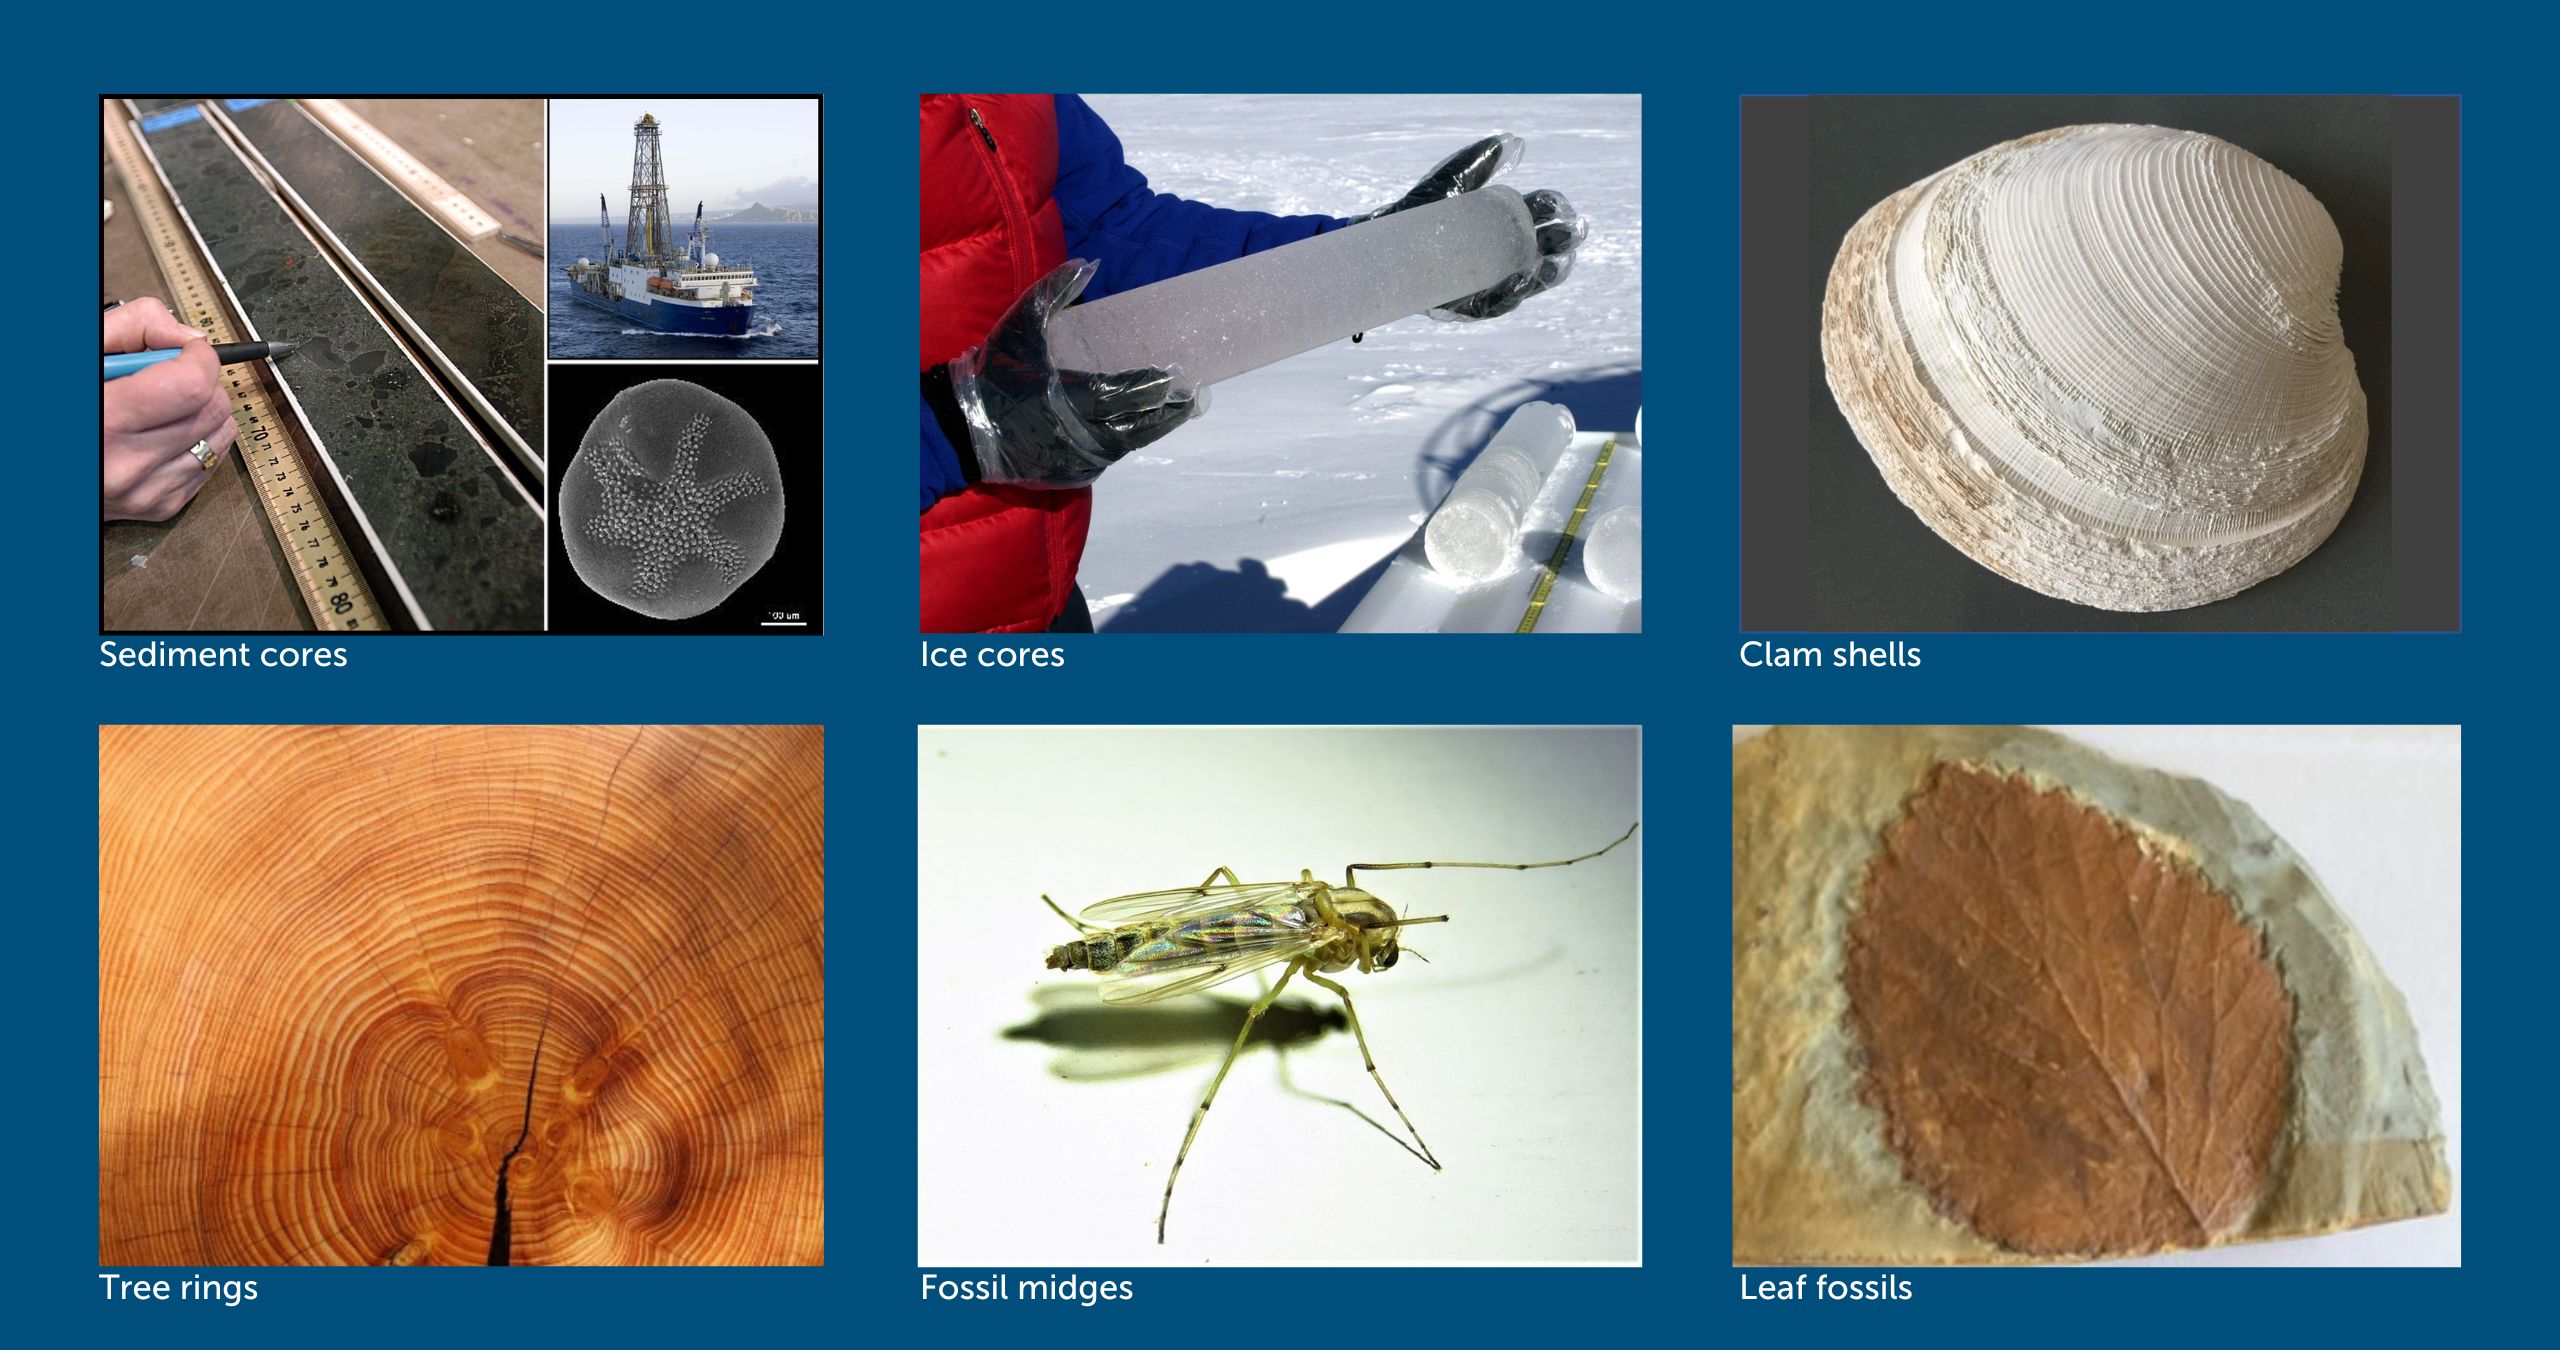 Collage of images of different climate proxies: sediment cores, ice cores, clam shells, tree rings, fossil midges, and fossil leaves.